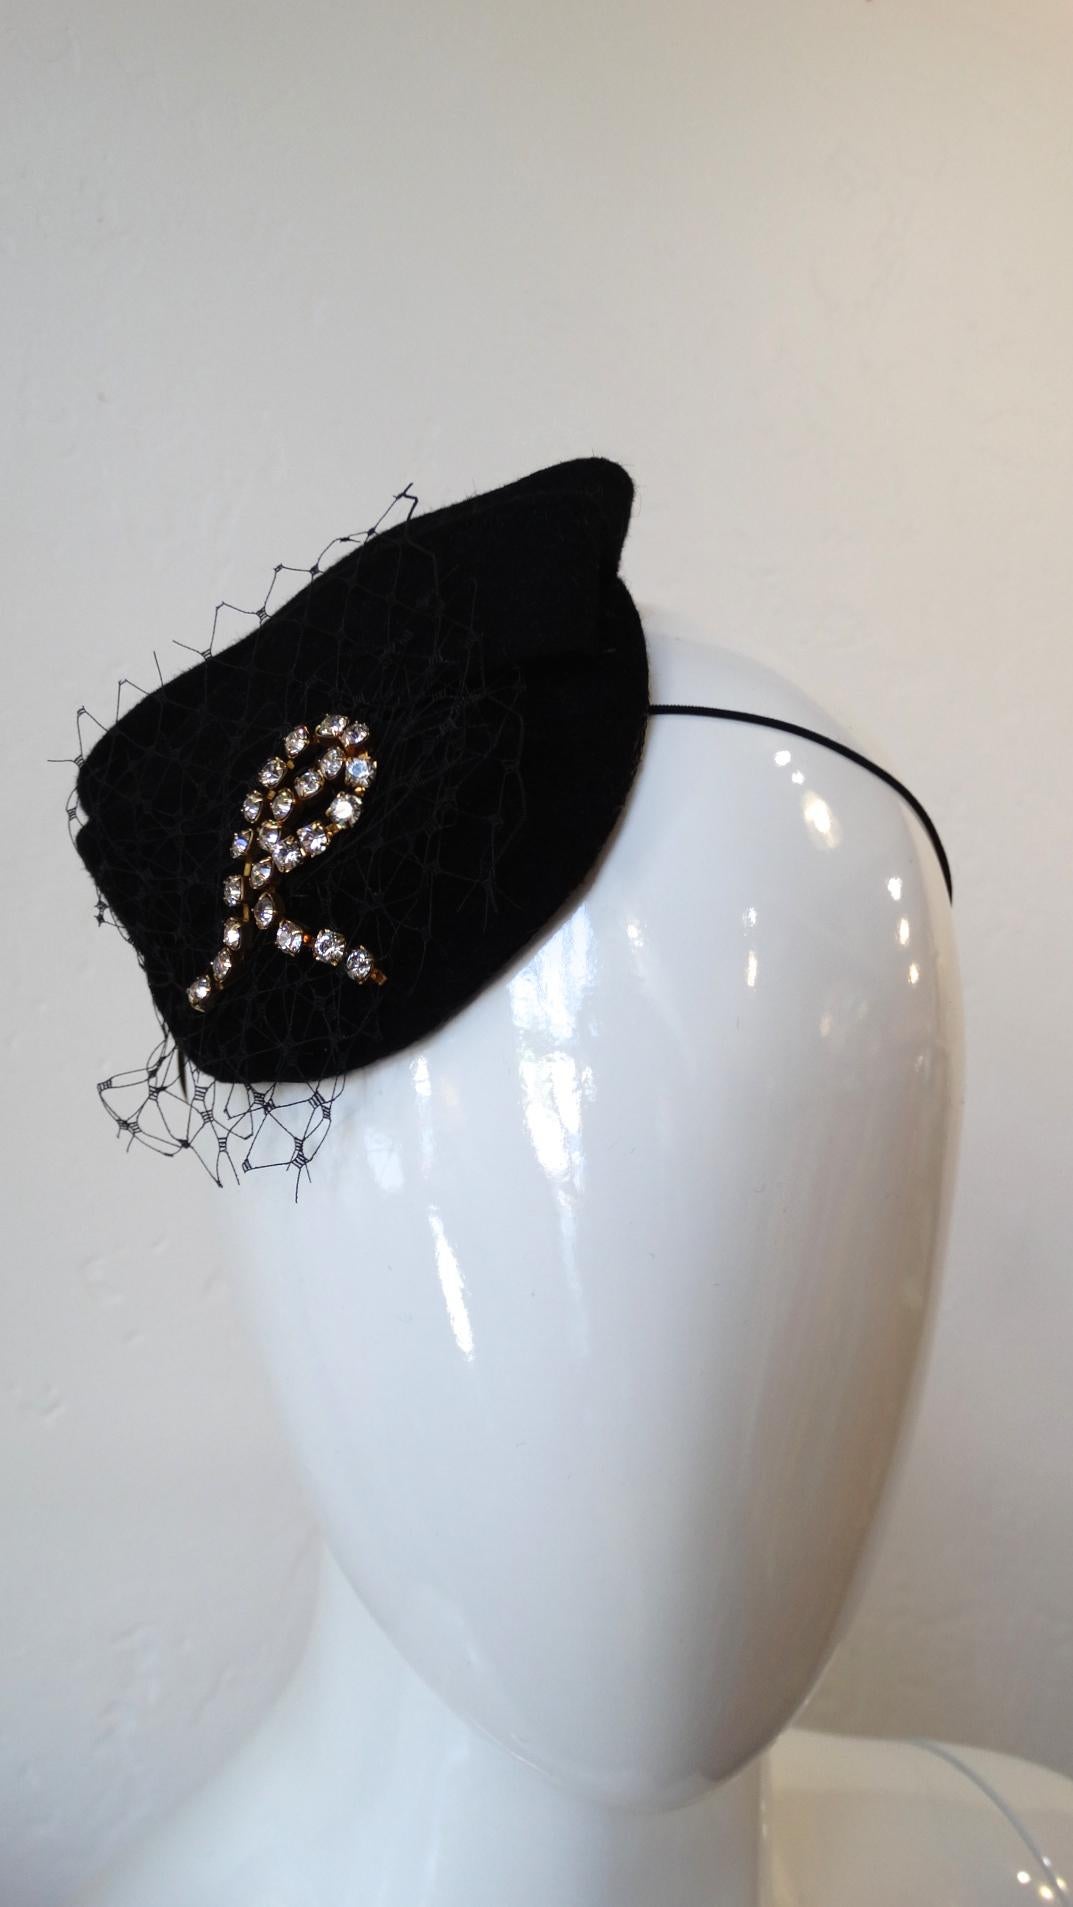 Channel your inner Material girl with our adorable 1980s netted fascinator from hat designer Selima by V! Black fabric abstract shape fascinator with a layer of netting affixed to the base. Rhinestone chain arranged in an 